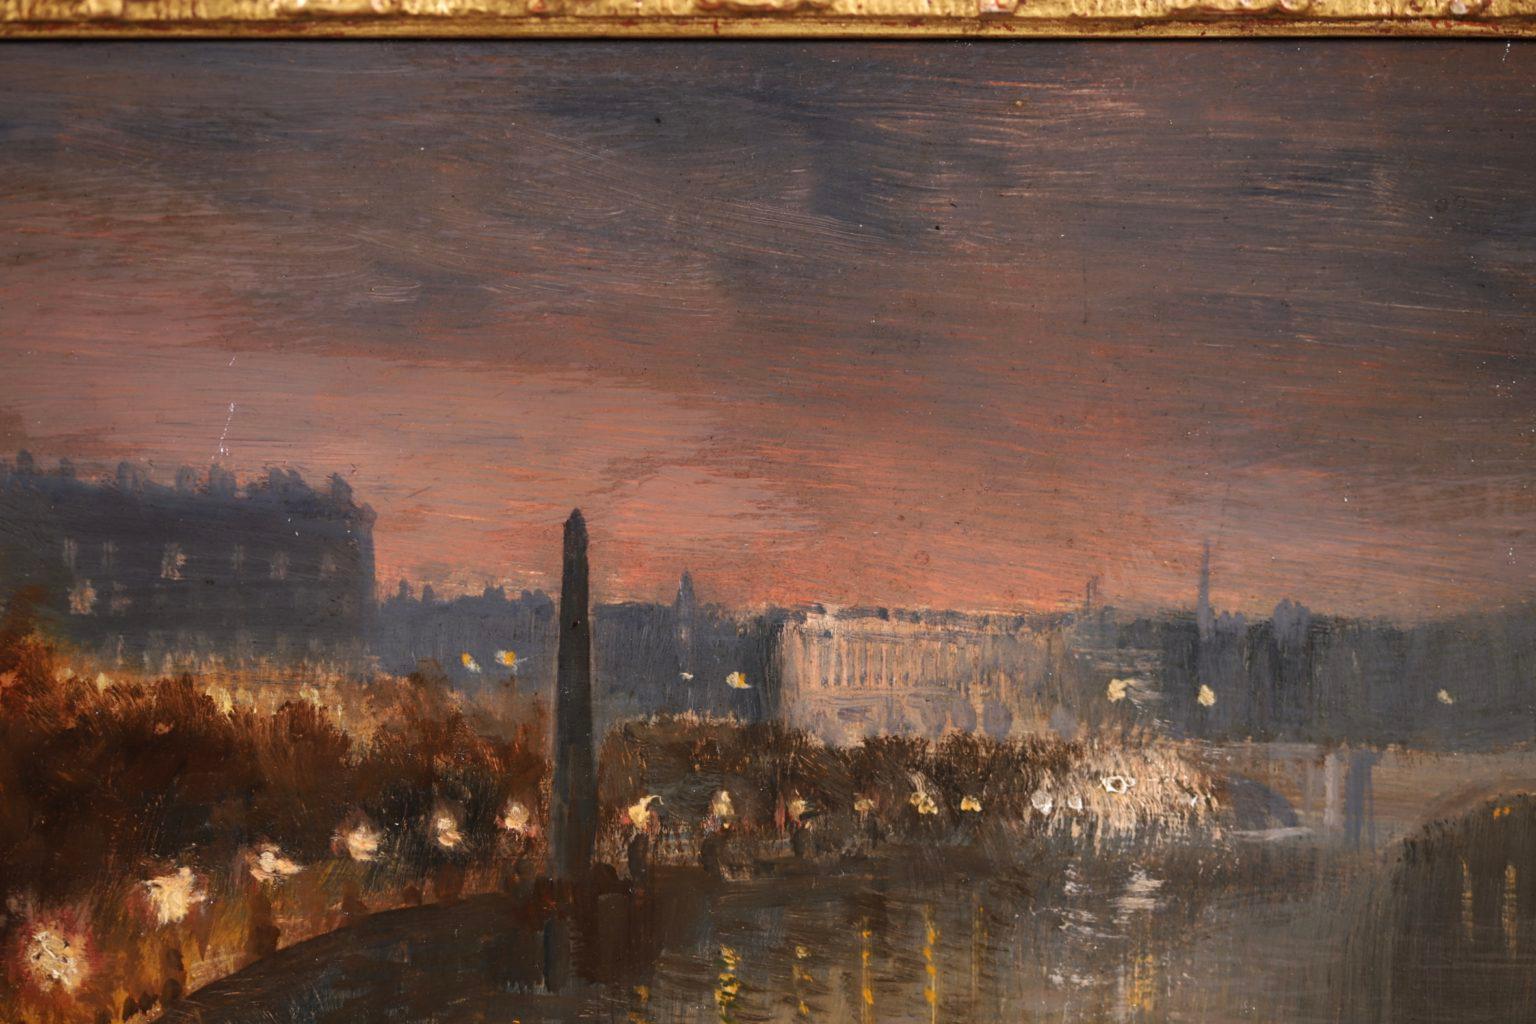 A beautiful oil on board cityscape circa 1915 by English impressionist painter George Hyde Pownall. This work shows the old Hotel Cecil which is the grand building on the left of the view - it occupied the space of the current Shell Building and The